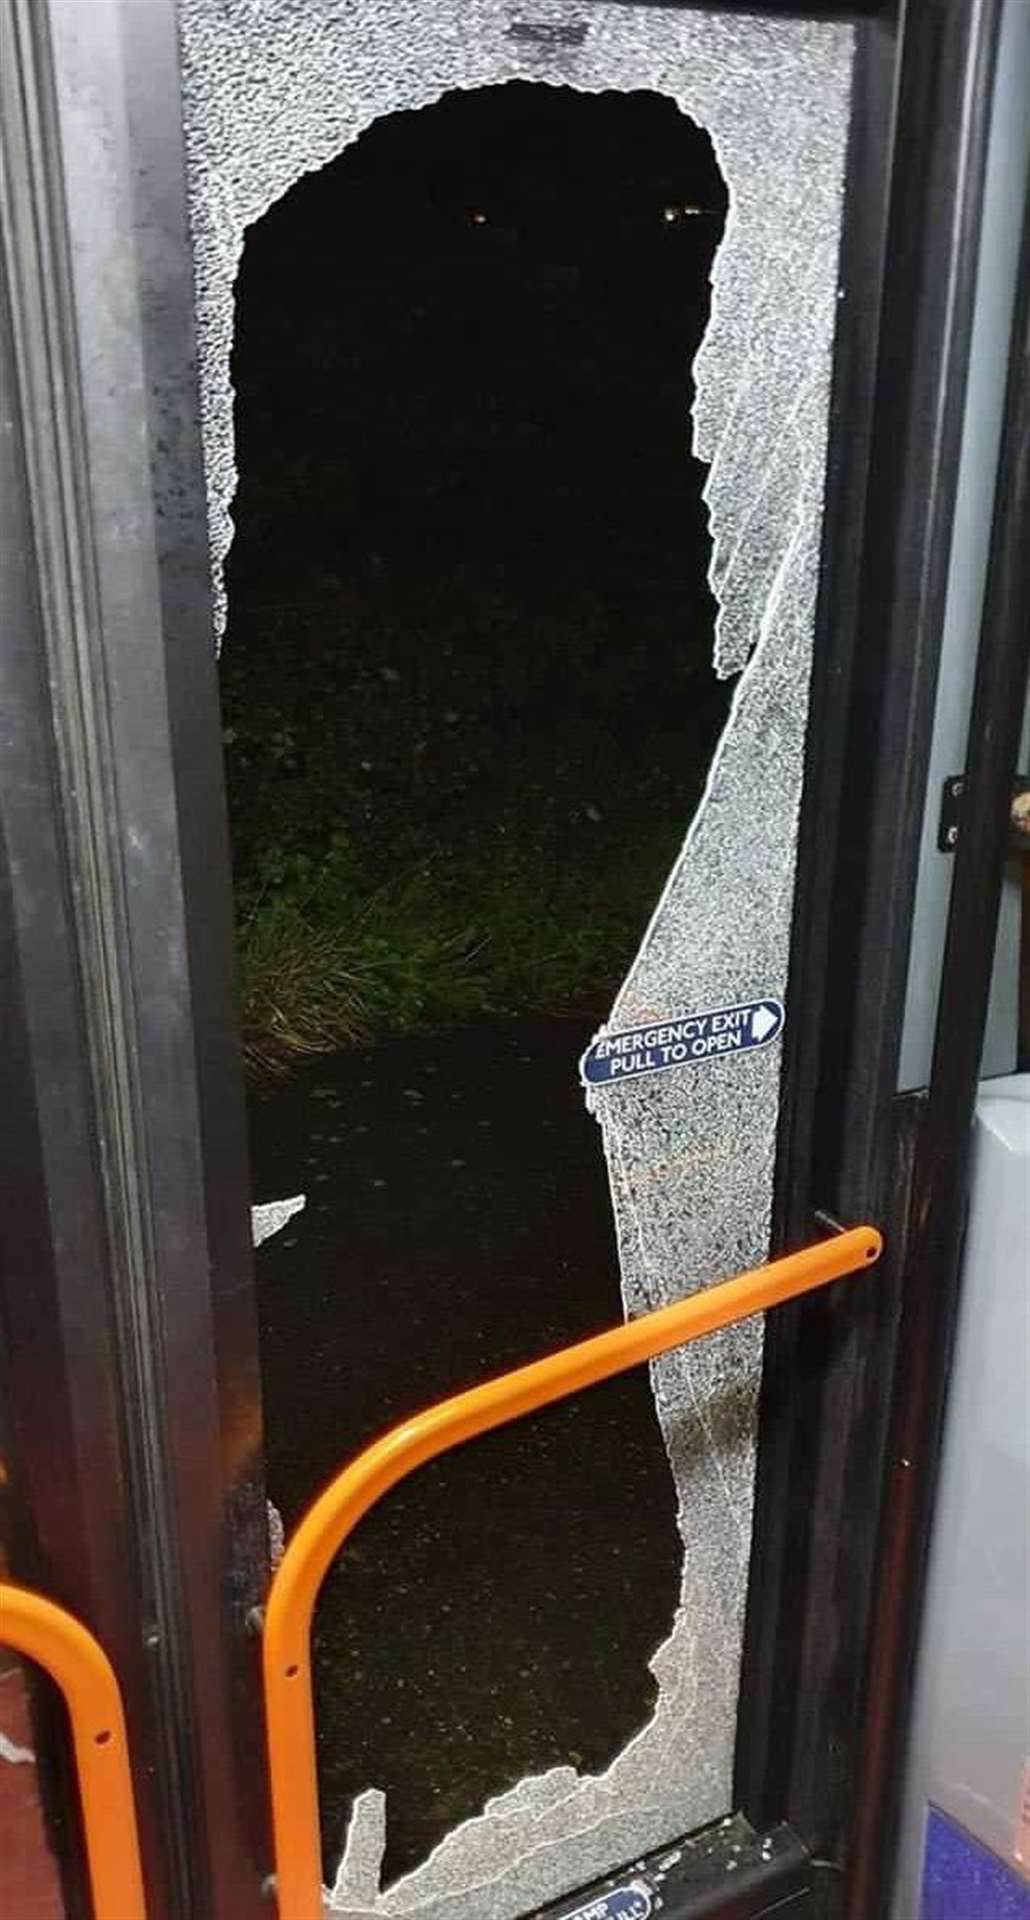 A smashed bus door. Picture: Matthew Arnold/Twitter